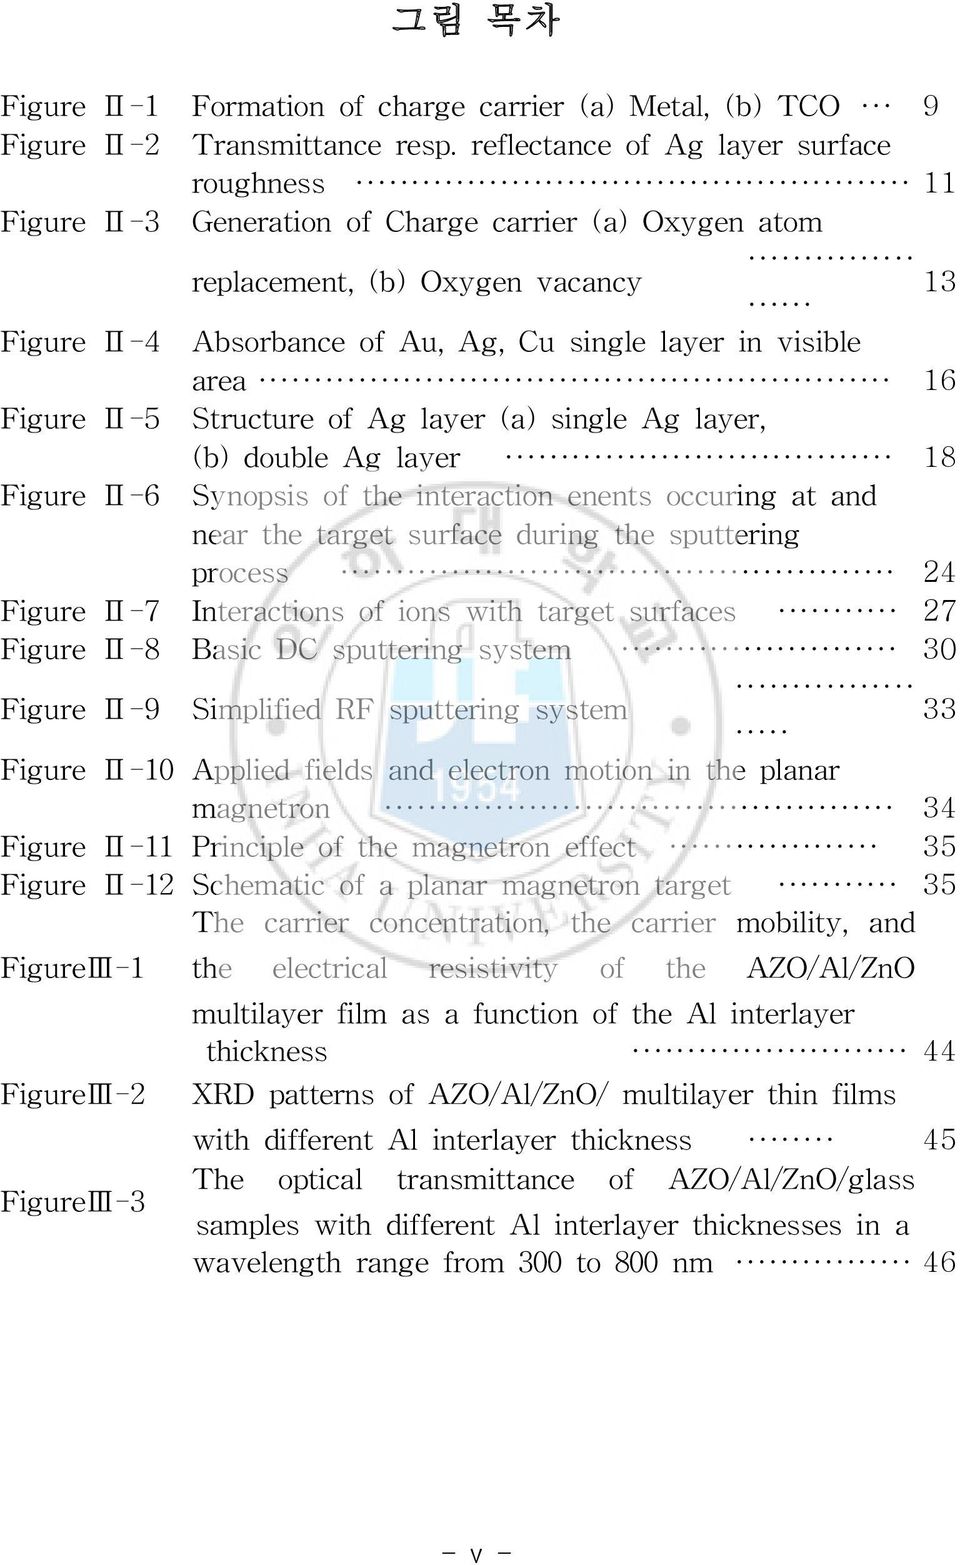 area 16 Figure Ⅱ-5 Structure of Ag layer (a) single Ag layer, (b) double Ag layer 18 Figure Ⅱ-6 Synopsis of the interaction enents occuring at and near the target surface during the sputtering